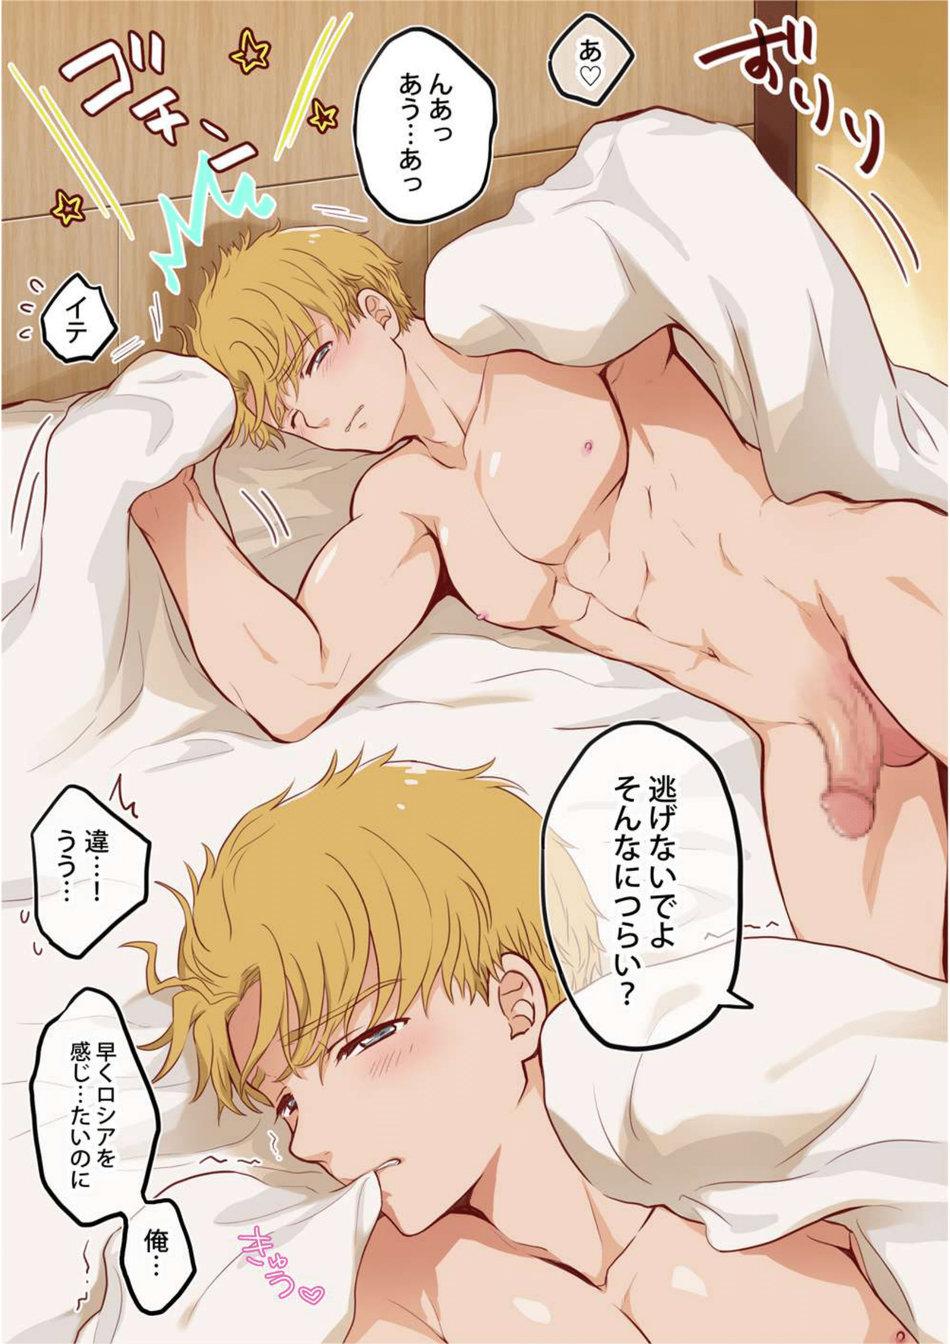 Scene Which one is better – Hetalia dj - Axis powers hetalia Pussy Licking - Page 2